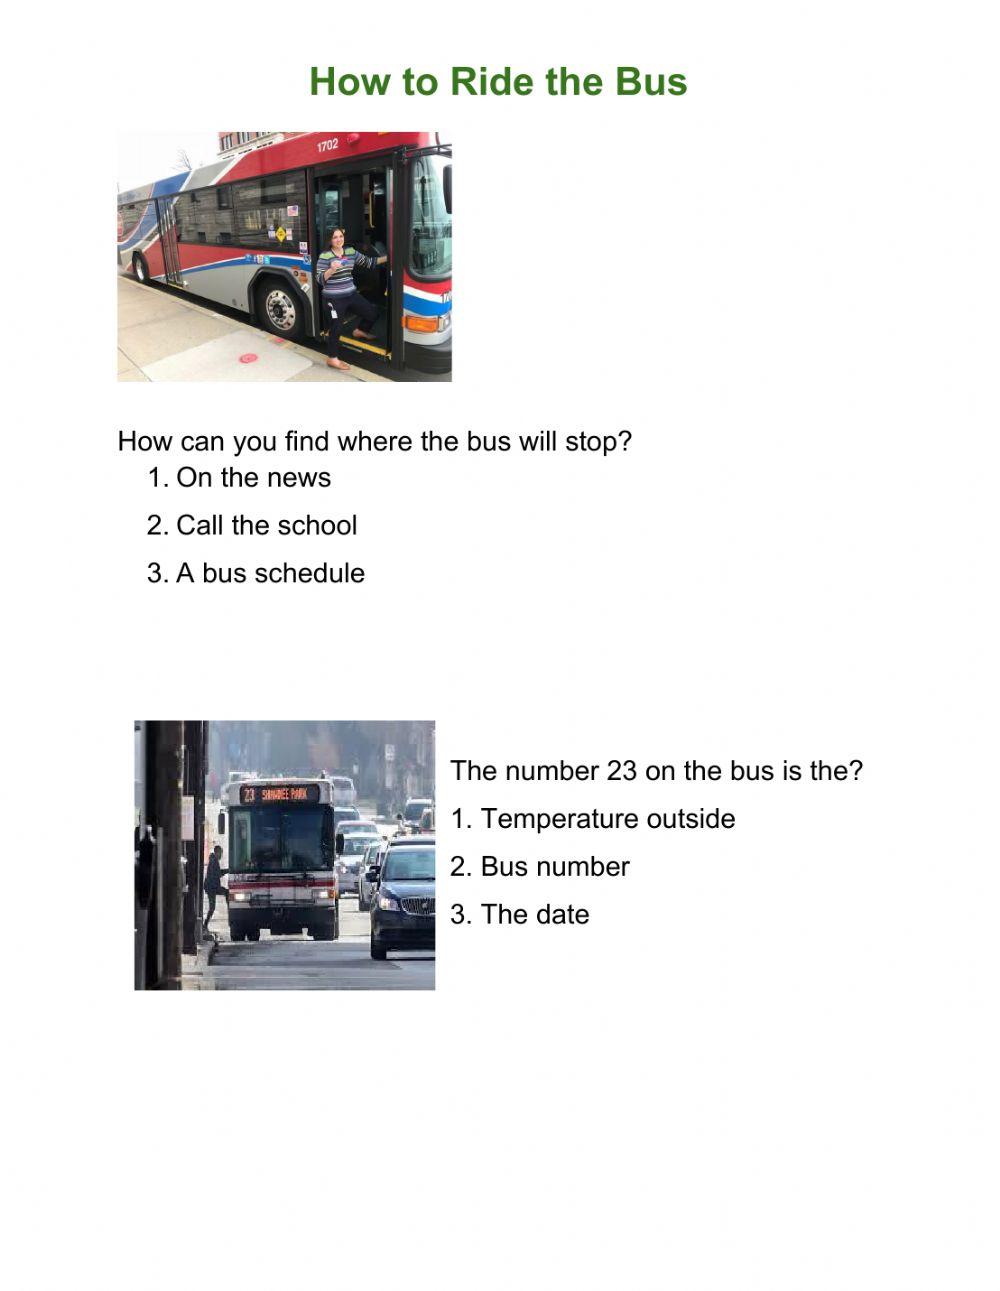 How to ride the bus